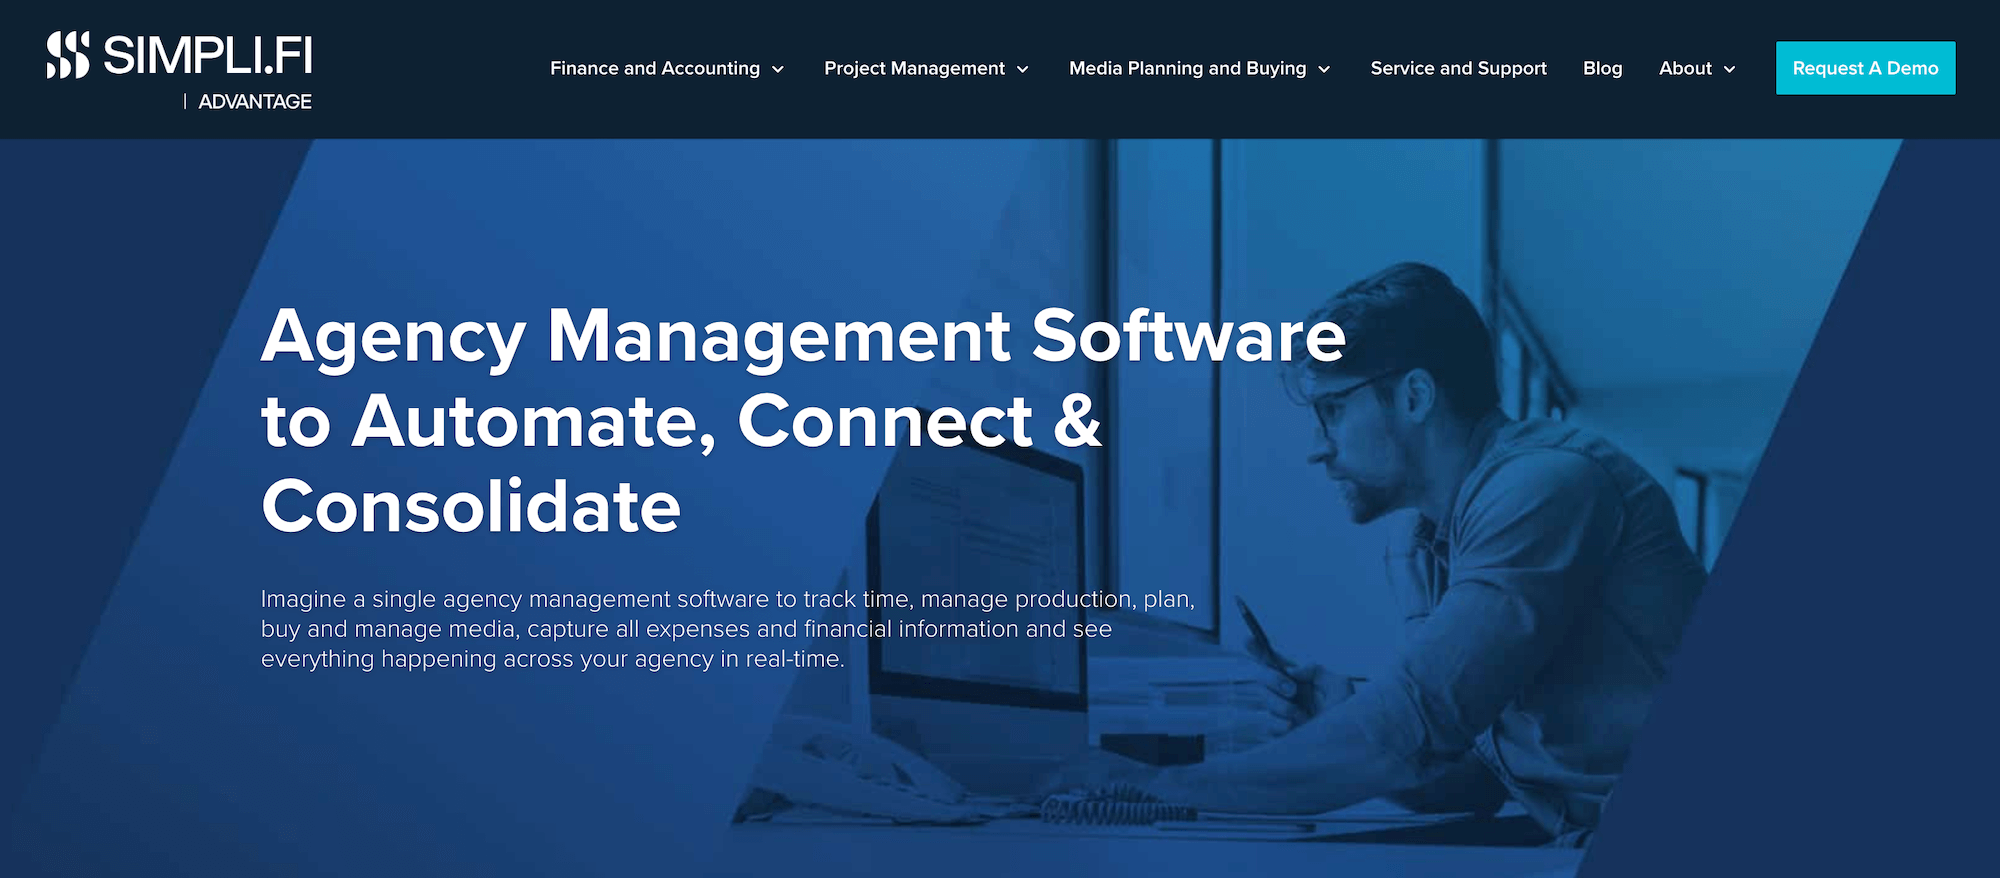 Advantage Simpli.fi homepage: Agency Management Software to Automate, Connect & Consolidate